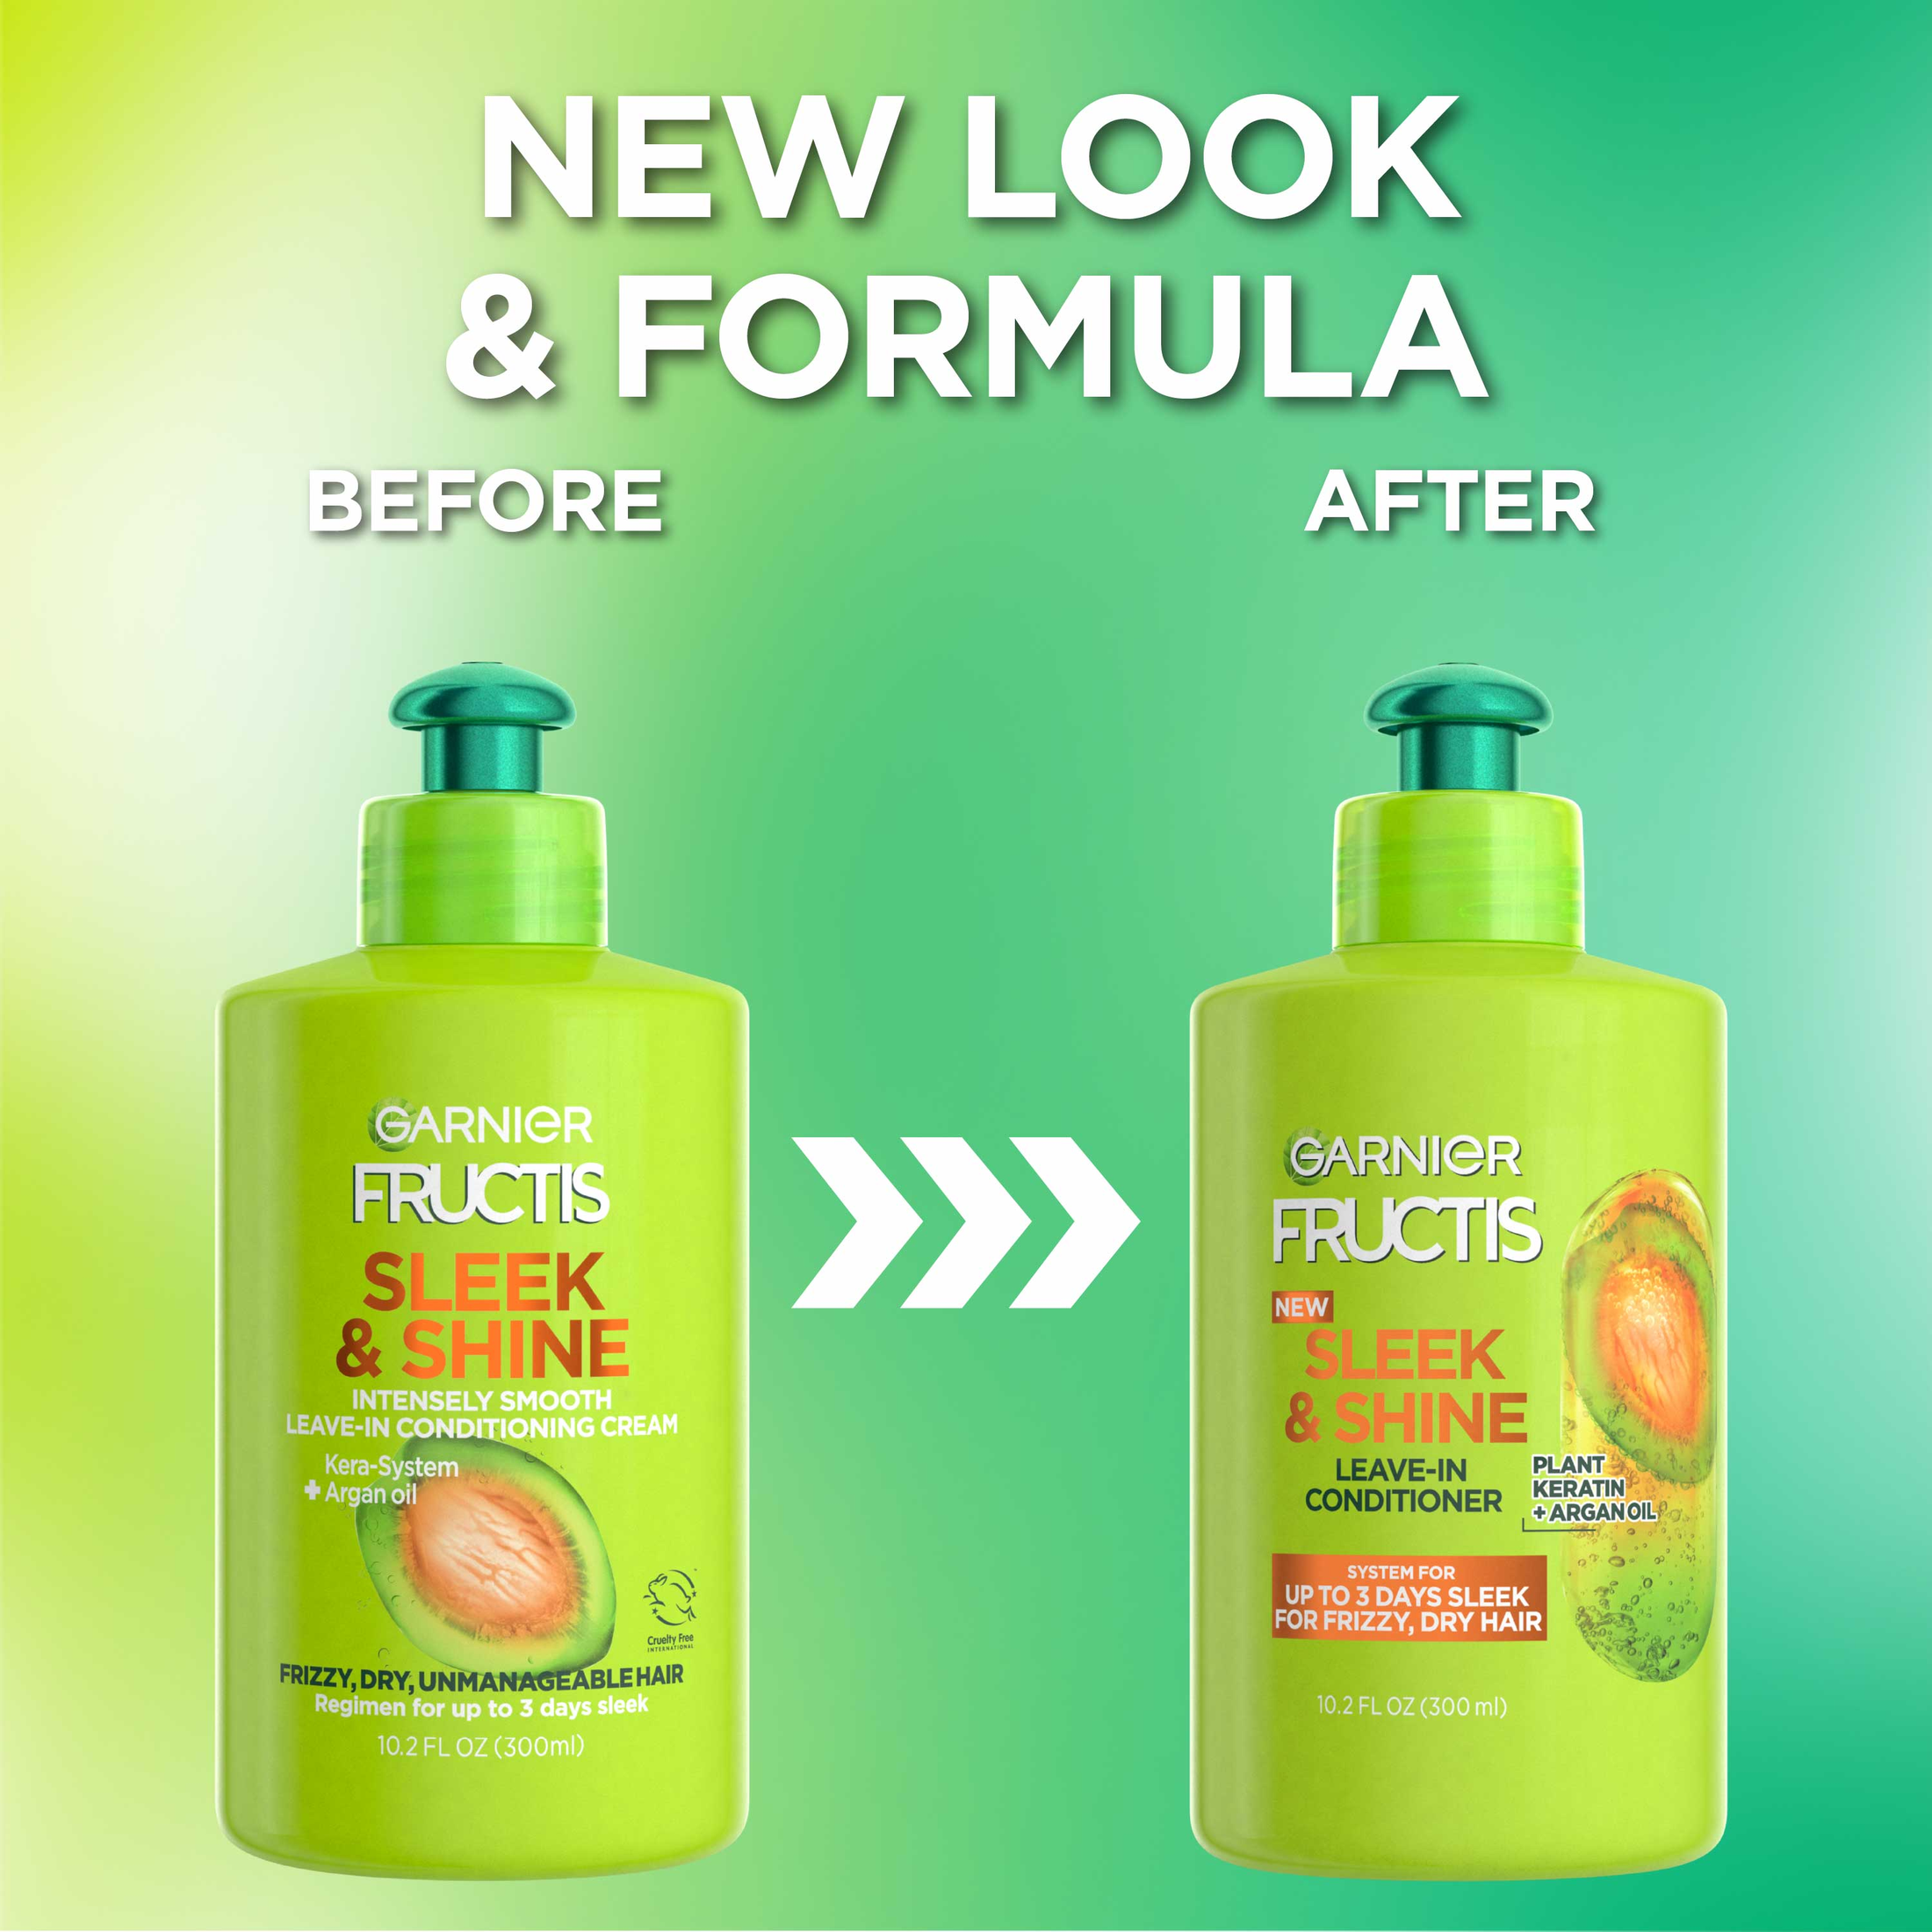 Garnier Fructis Sleek and Shine Leave In Conditioner with Argan Oil, 10.2 fl oz - image 4 of 9